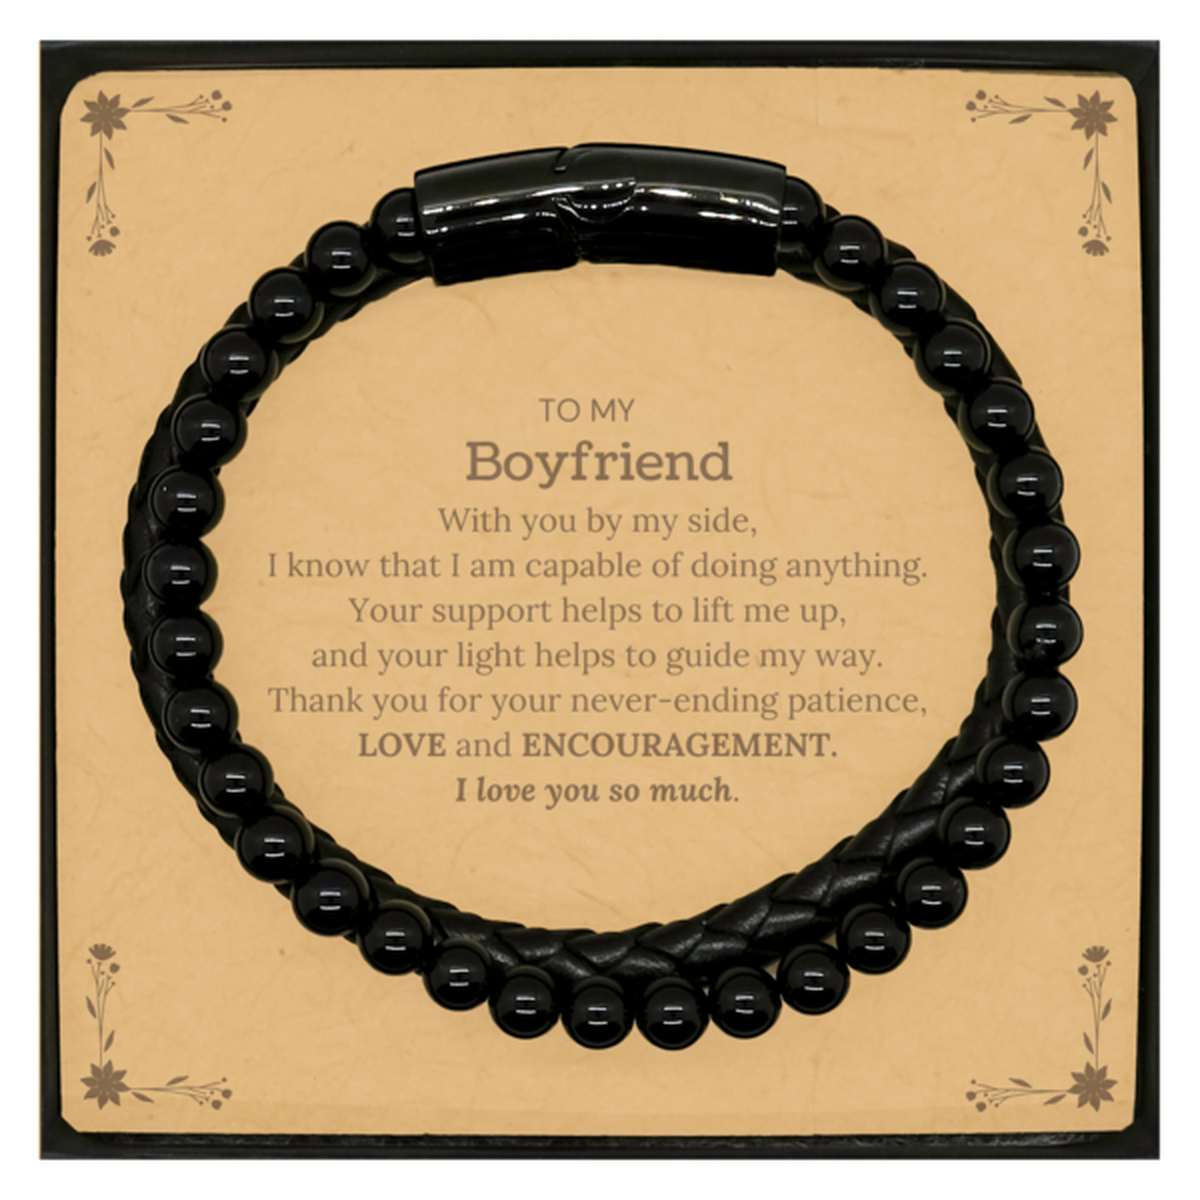 Appreciation Boyfriend Stone Leather Bracelets Gifts, To My Boyfriend Birthday Christmas Wedding Keepsake Gifts for Boyfriend With you by my side, I know that I am capable of doing anything. I love you so much